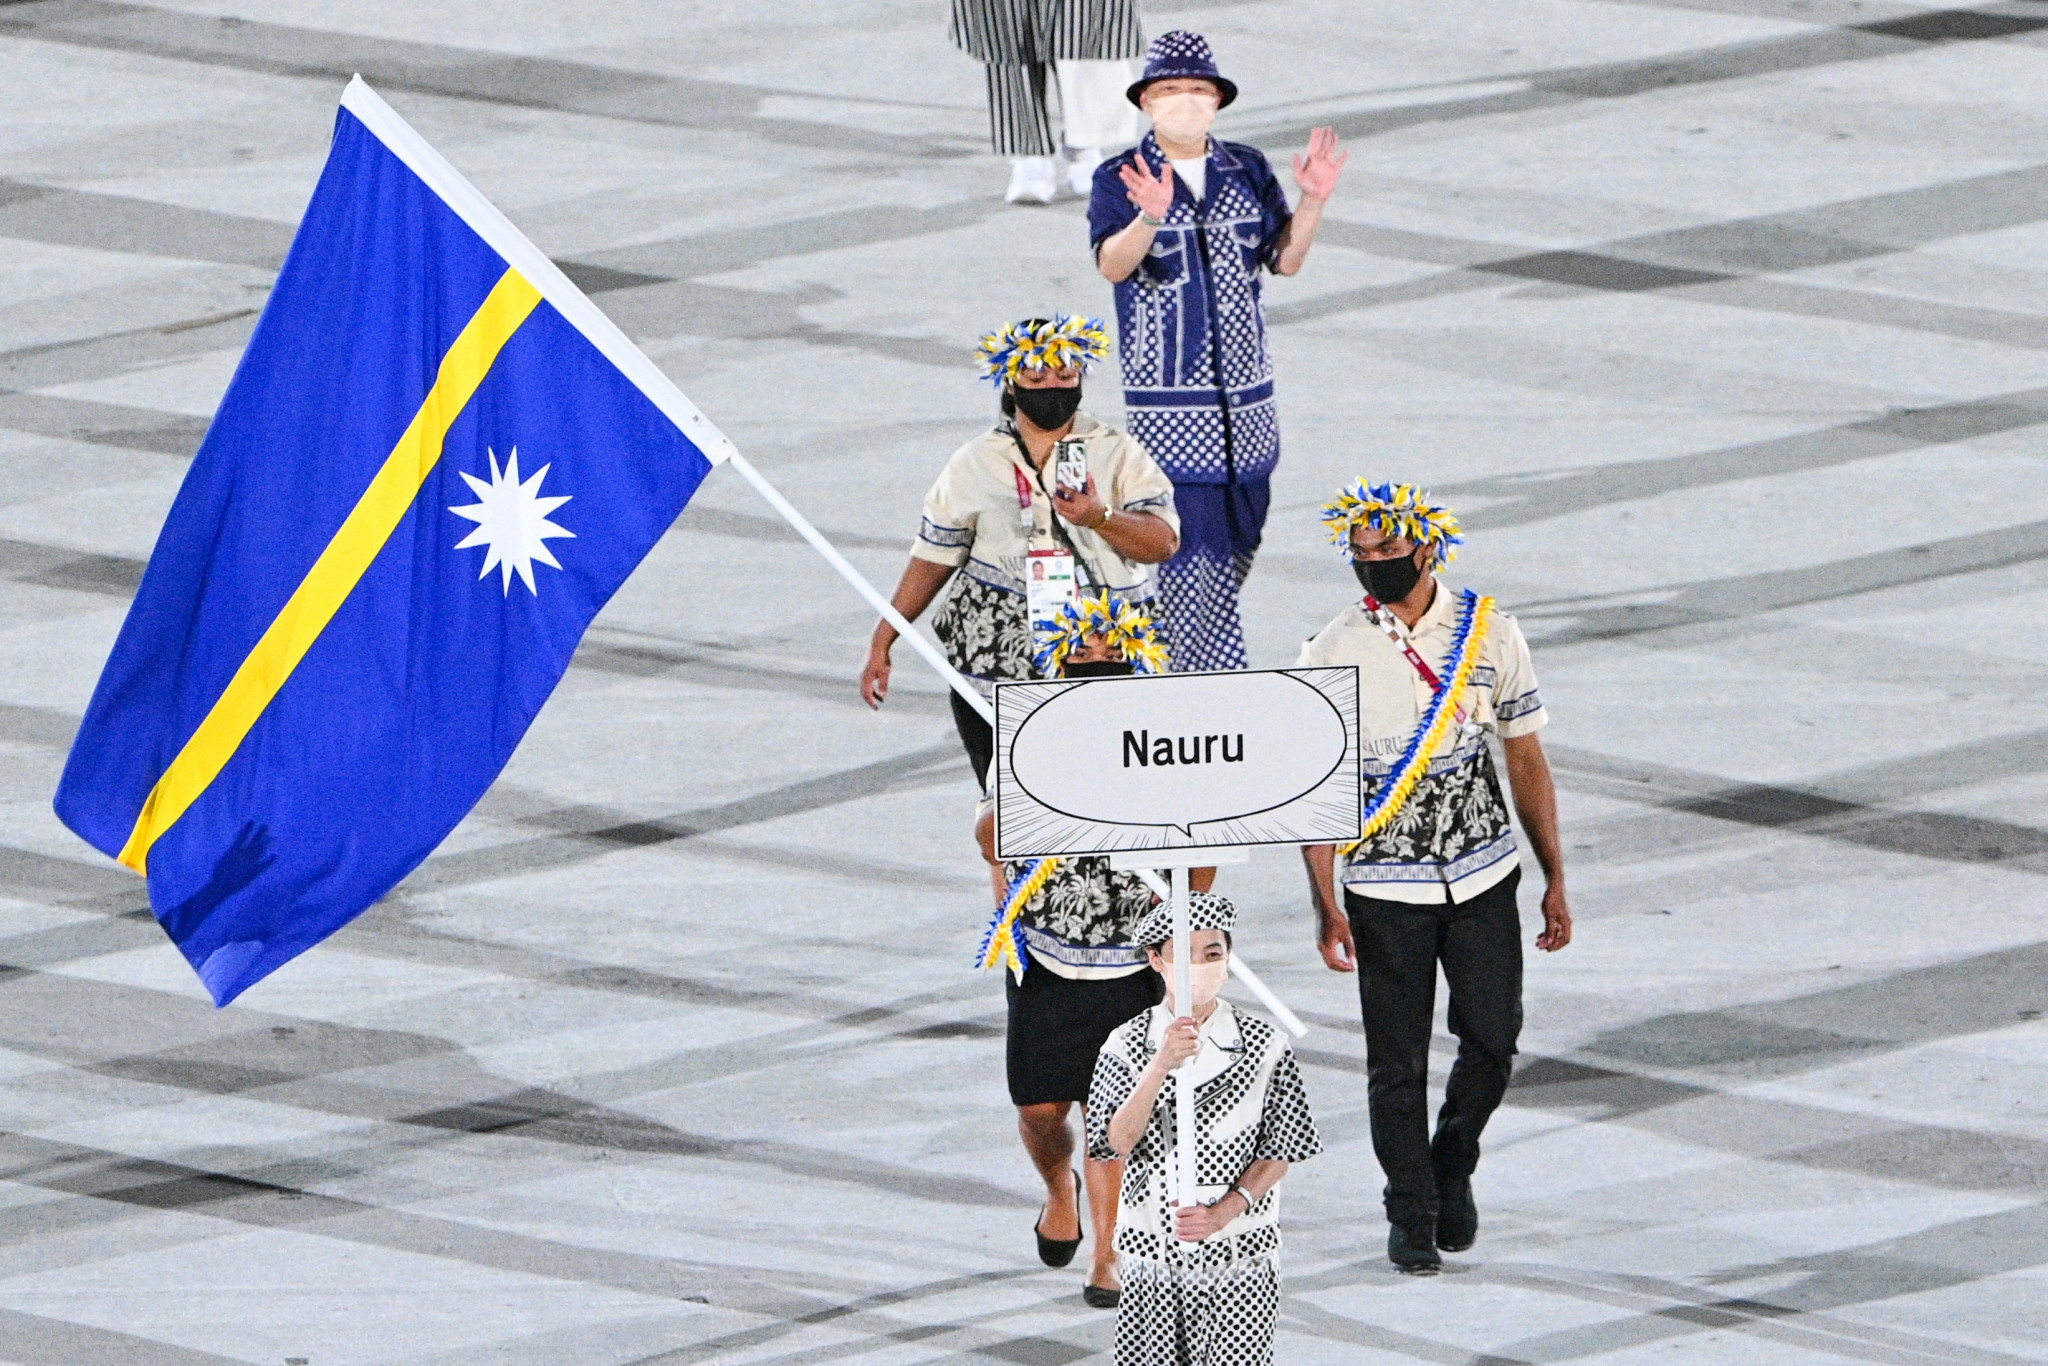 IPC President Andrew Parsons has spoken of his desire to create more National Paralympic Committees, including in Pacific countries like Nauru that has a National Olympic Committee ©Getty Images